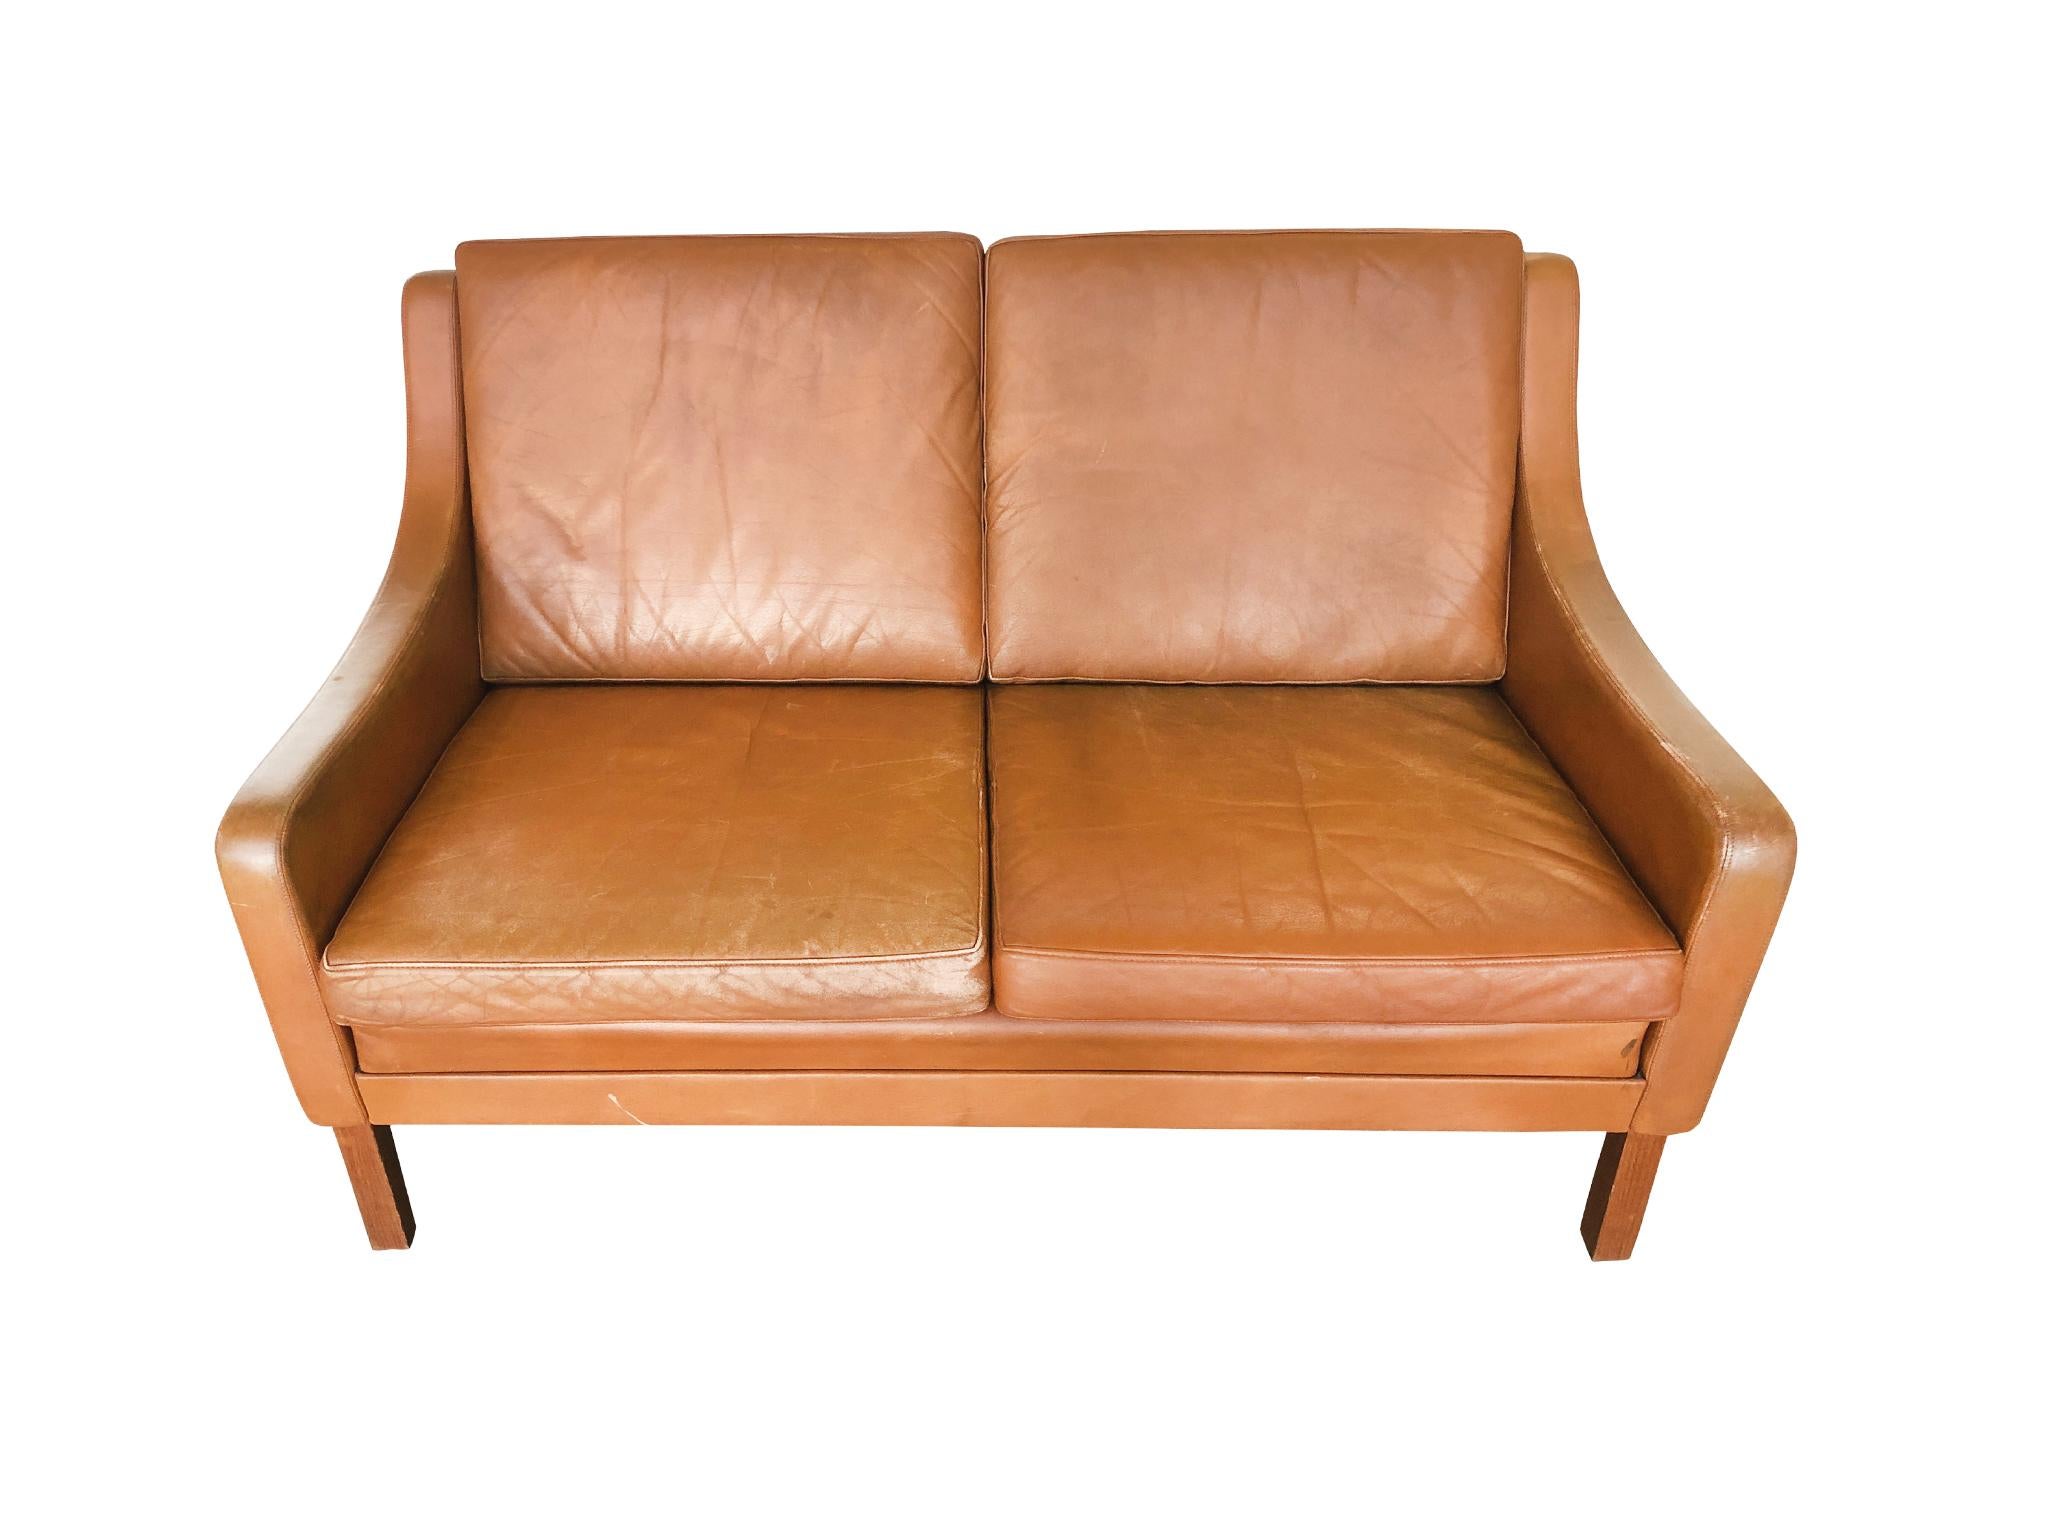 An elegant leather settee designed in the manner of Børge Mogensen. Manufactured 1970s-1980s. Like Mogensen's creations, this settee is designed with Classic smooth lines and soft, rounded edges. The upholstery is a well-aged leather in